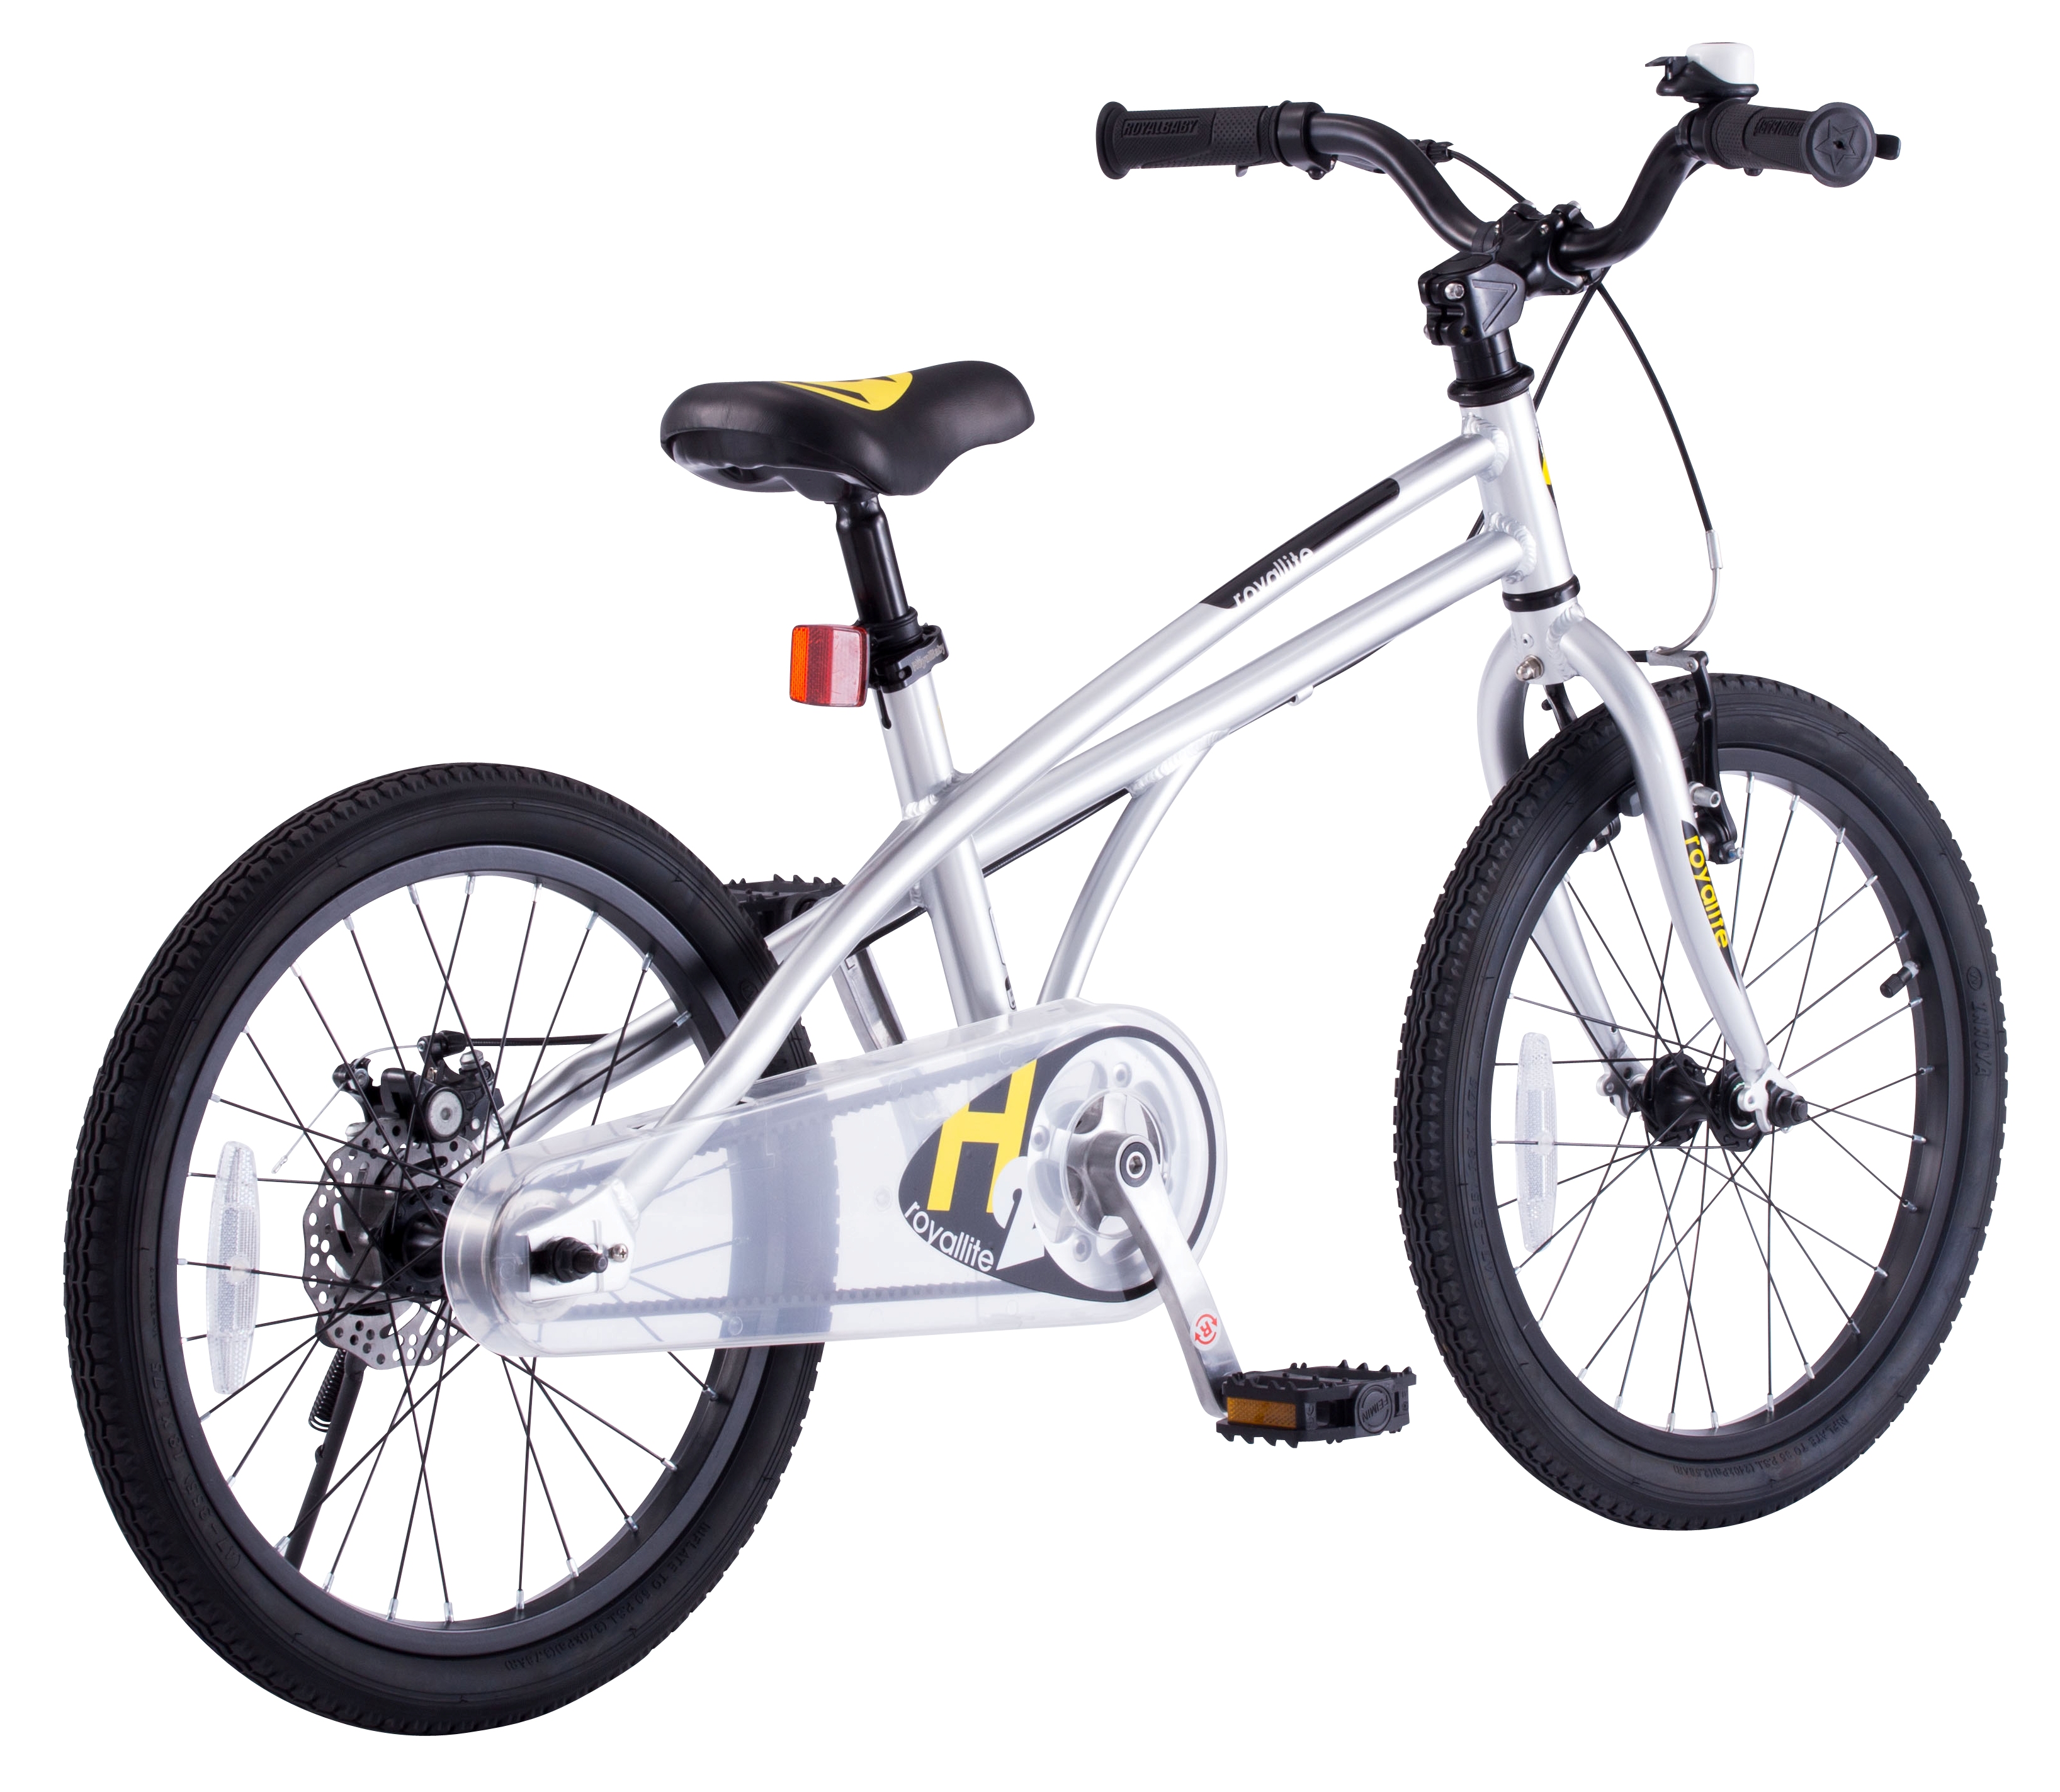 Royalbaby RoyalBaby H2 Super Light Alloy 18 Inch Kids Bicycle Age 4 - 6, Silver and Yellow - image 4 of 5